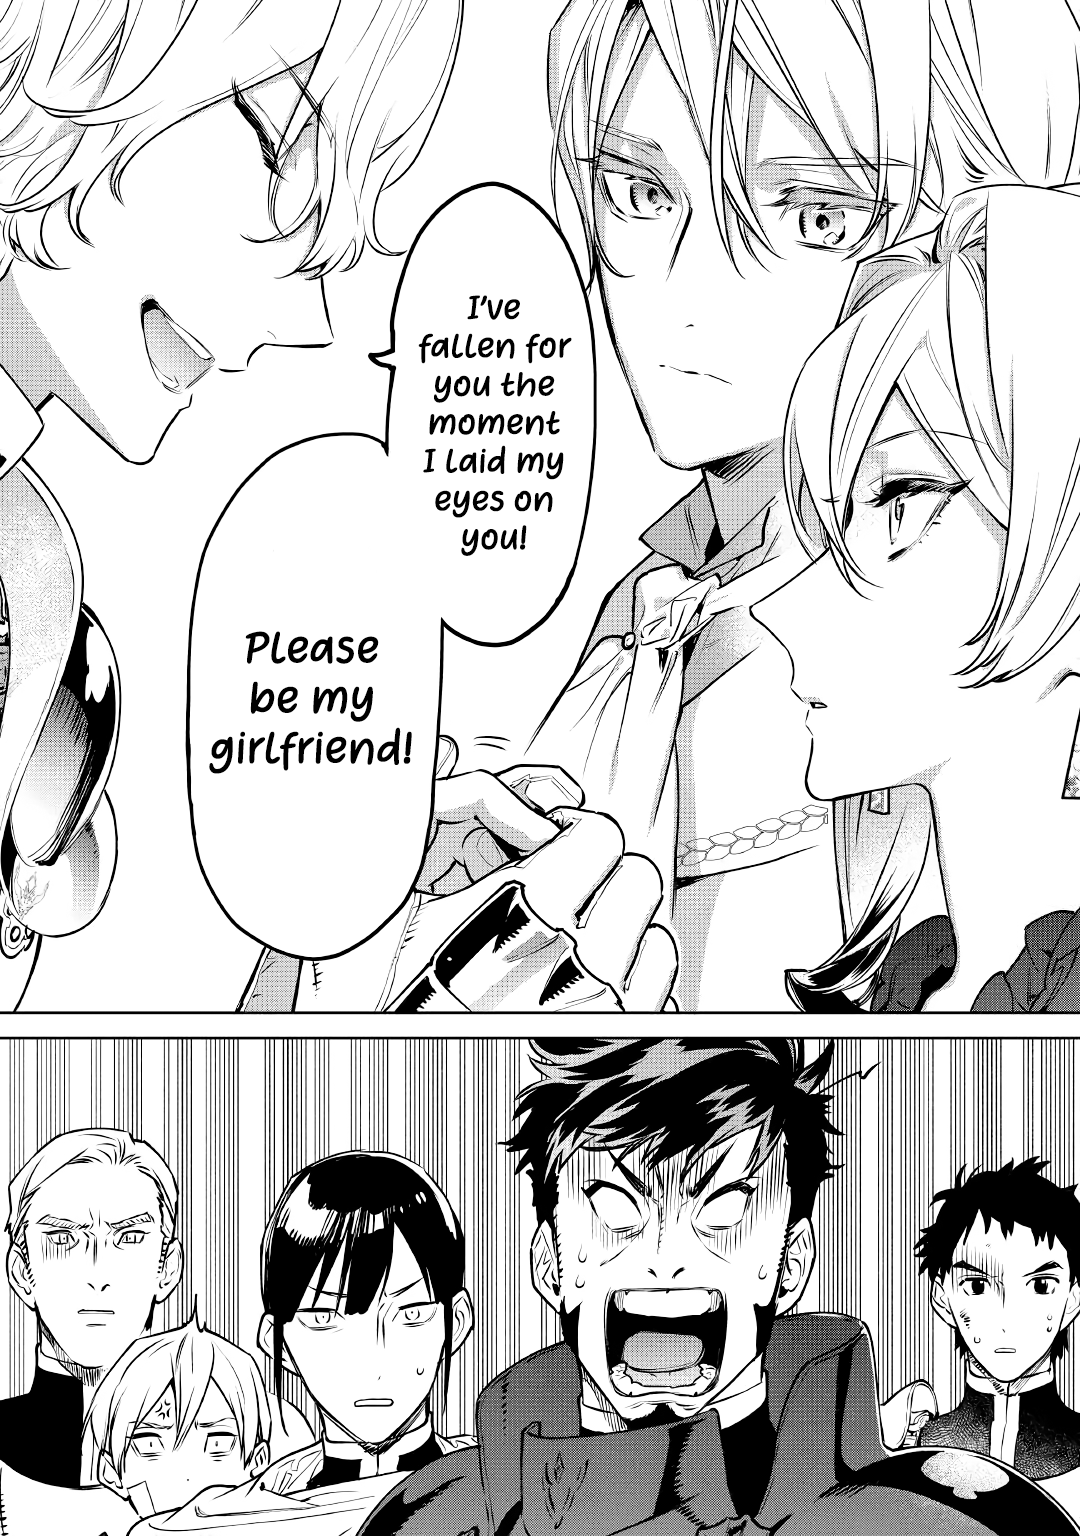 May I Ask For One Final Thing? - Page 2